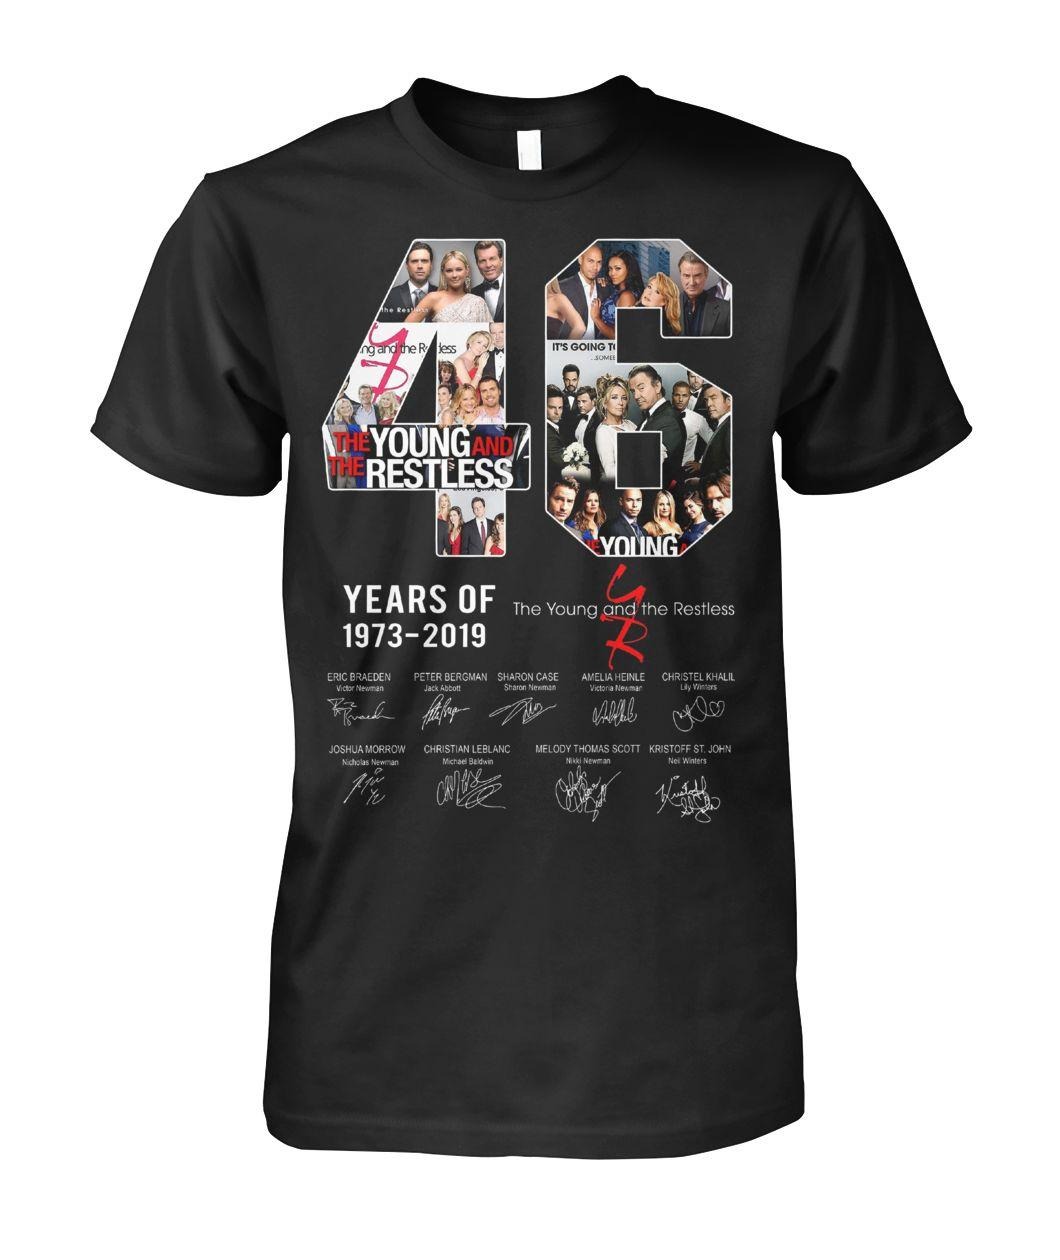 46 years of the Young and the Restless cotton shirt